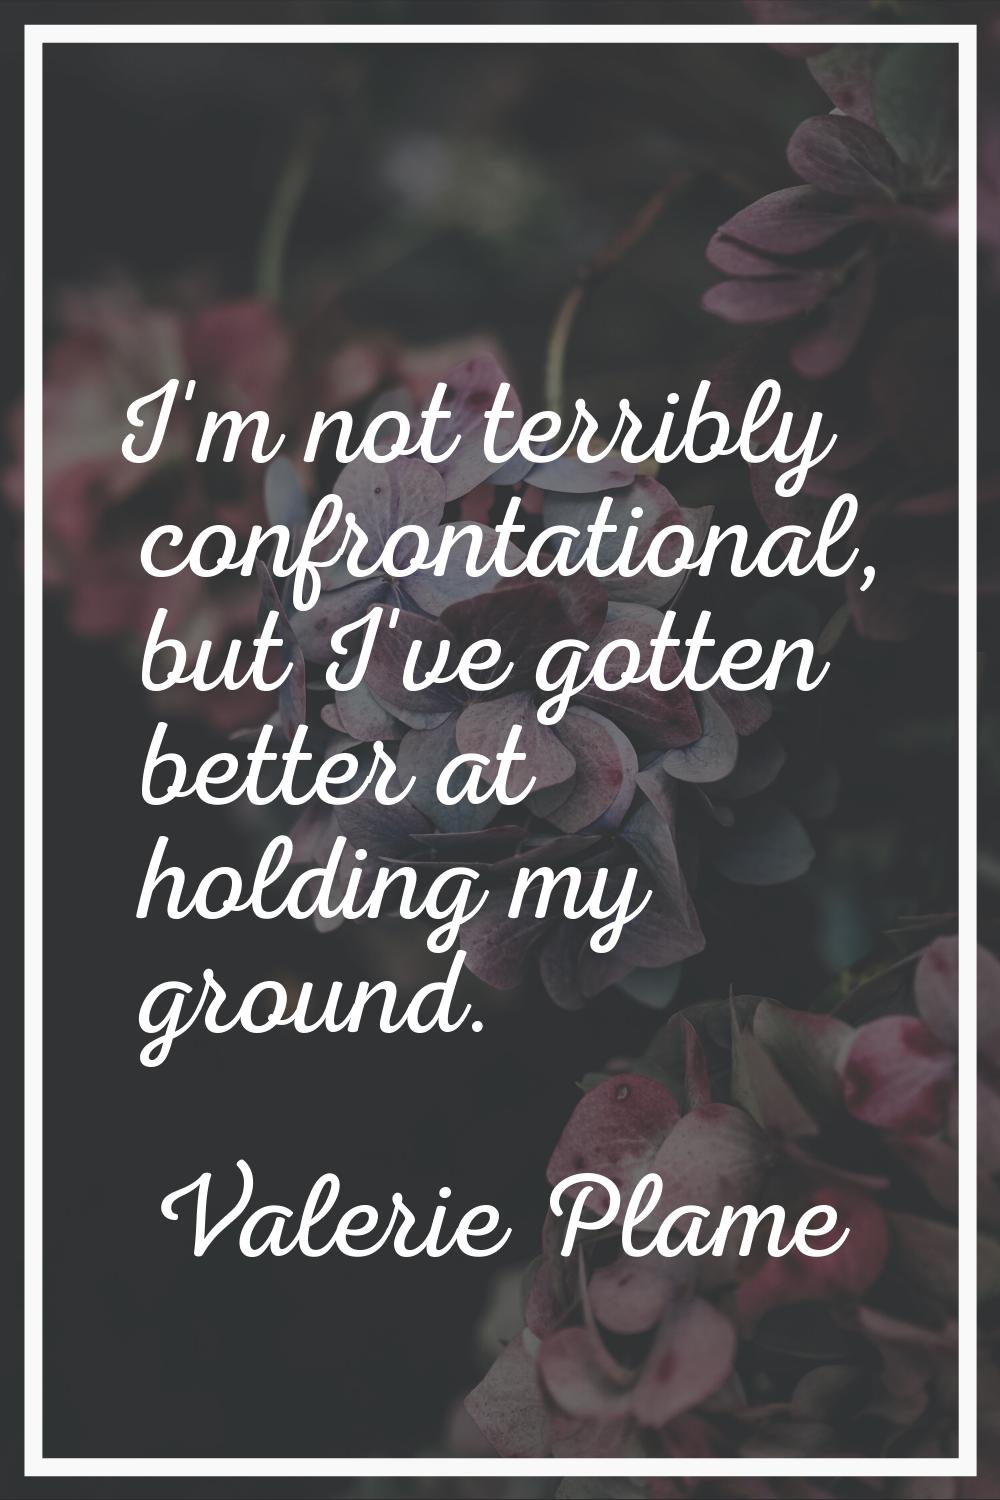 I'm not terribly confrontational, but I've gotten better at holding my ground.